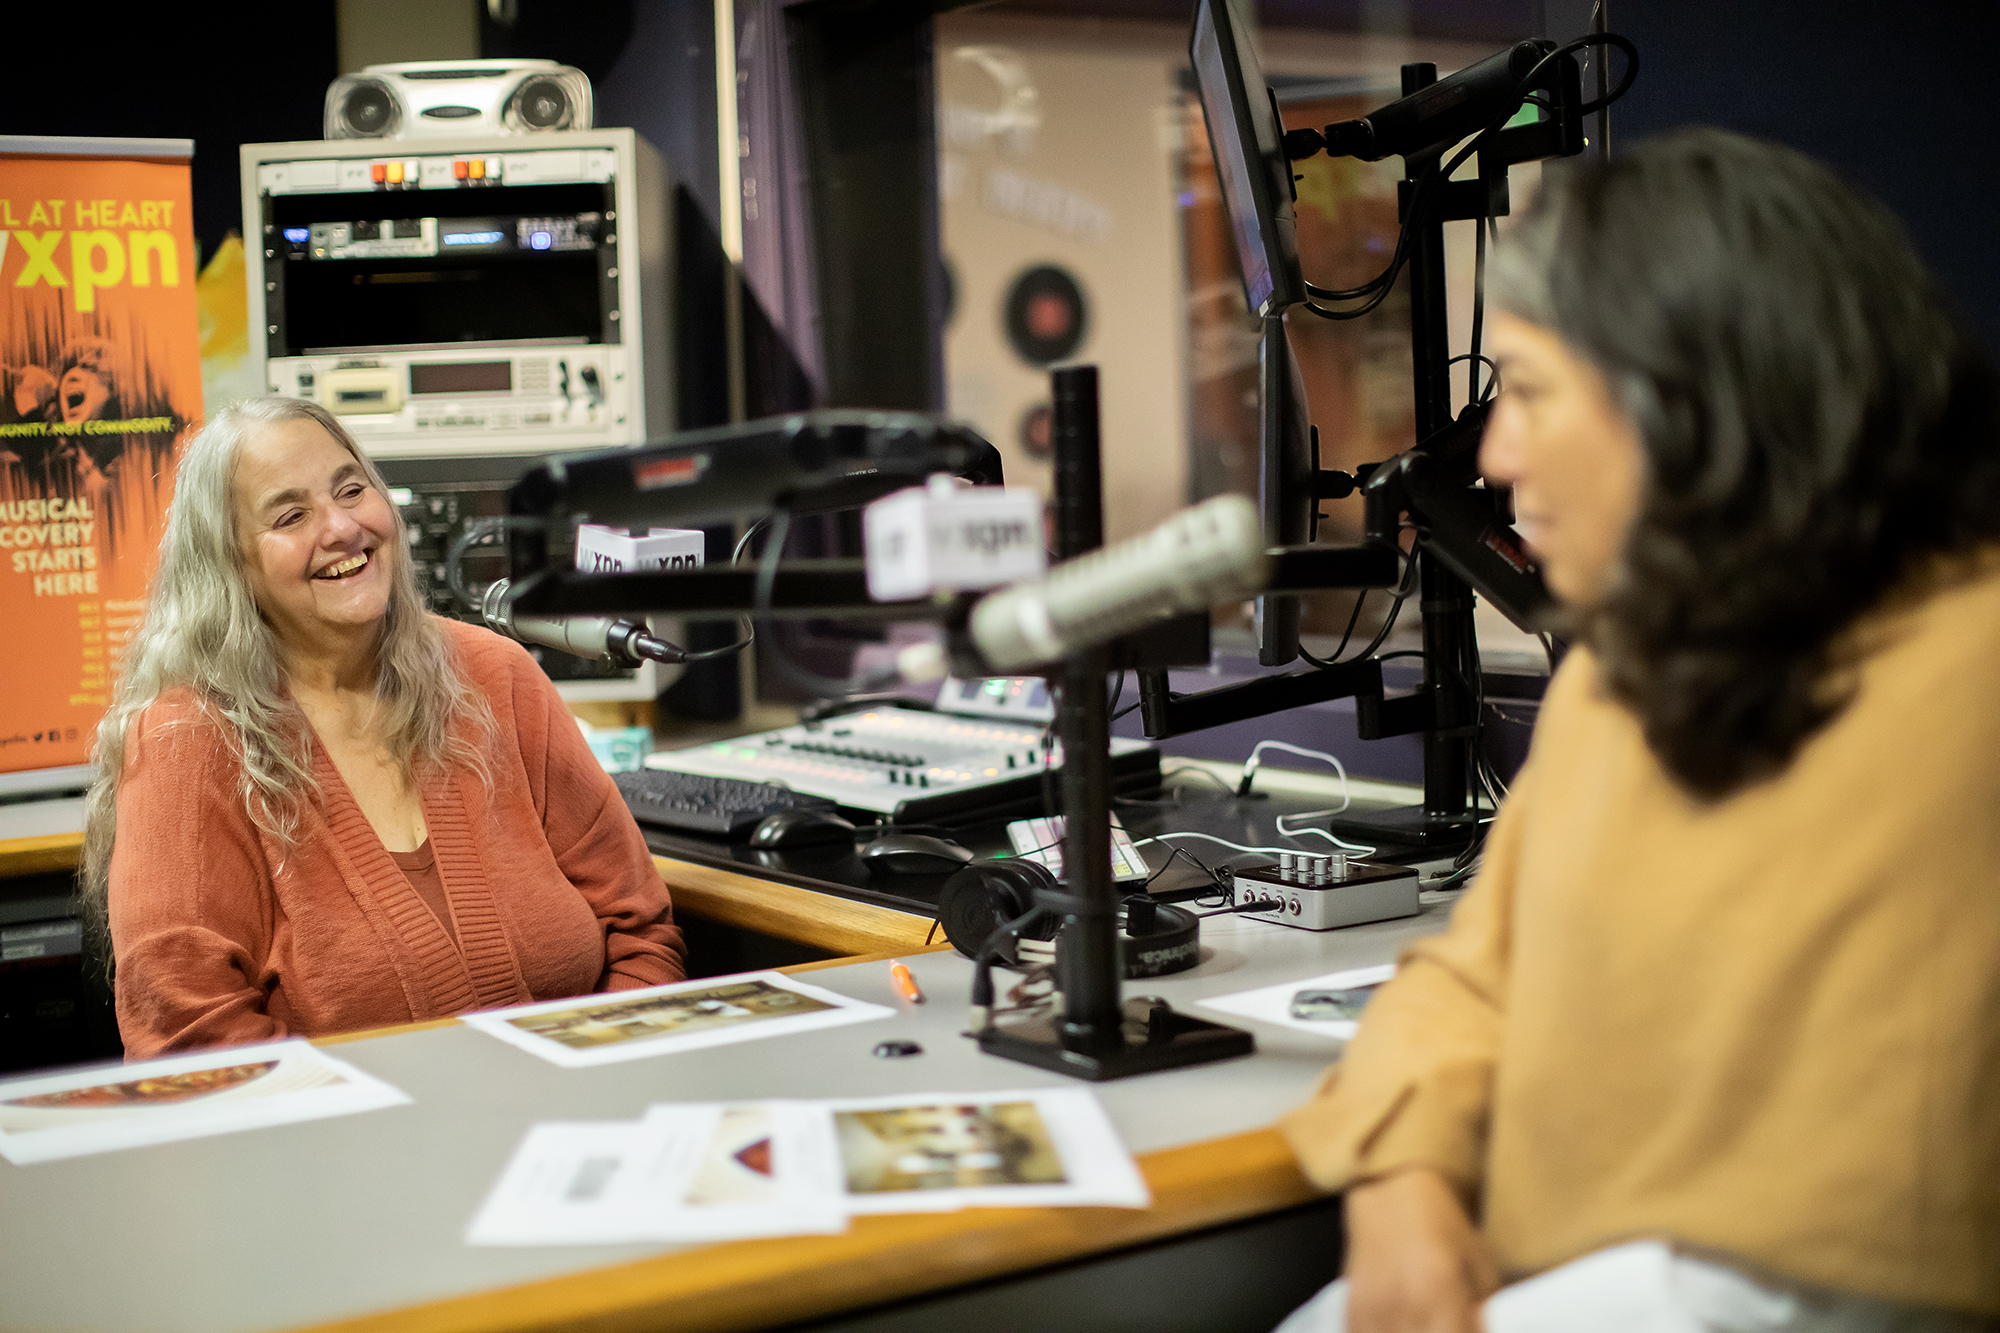 Kathy O'Connell laughs while speaking with Gwendolyn DuBois Shaw while they sit in front of microphones in the radio recording studion. 